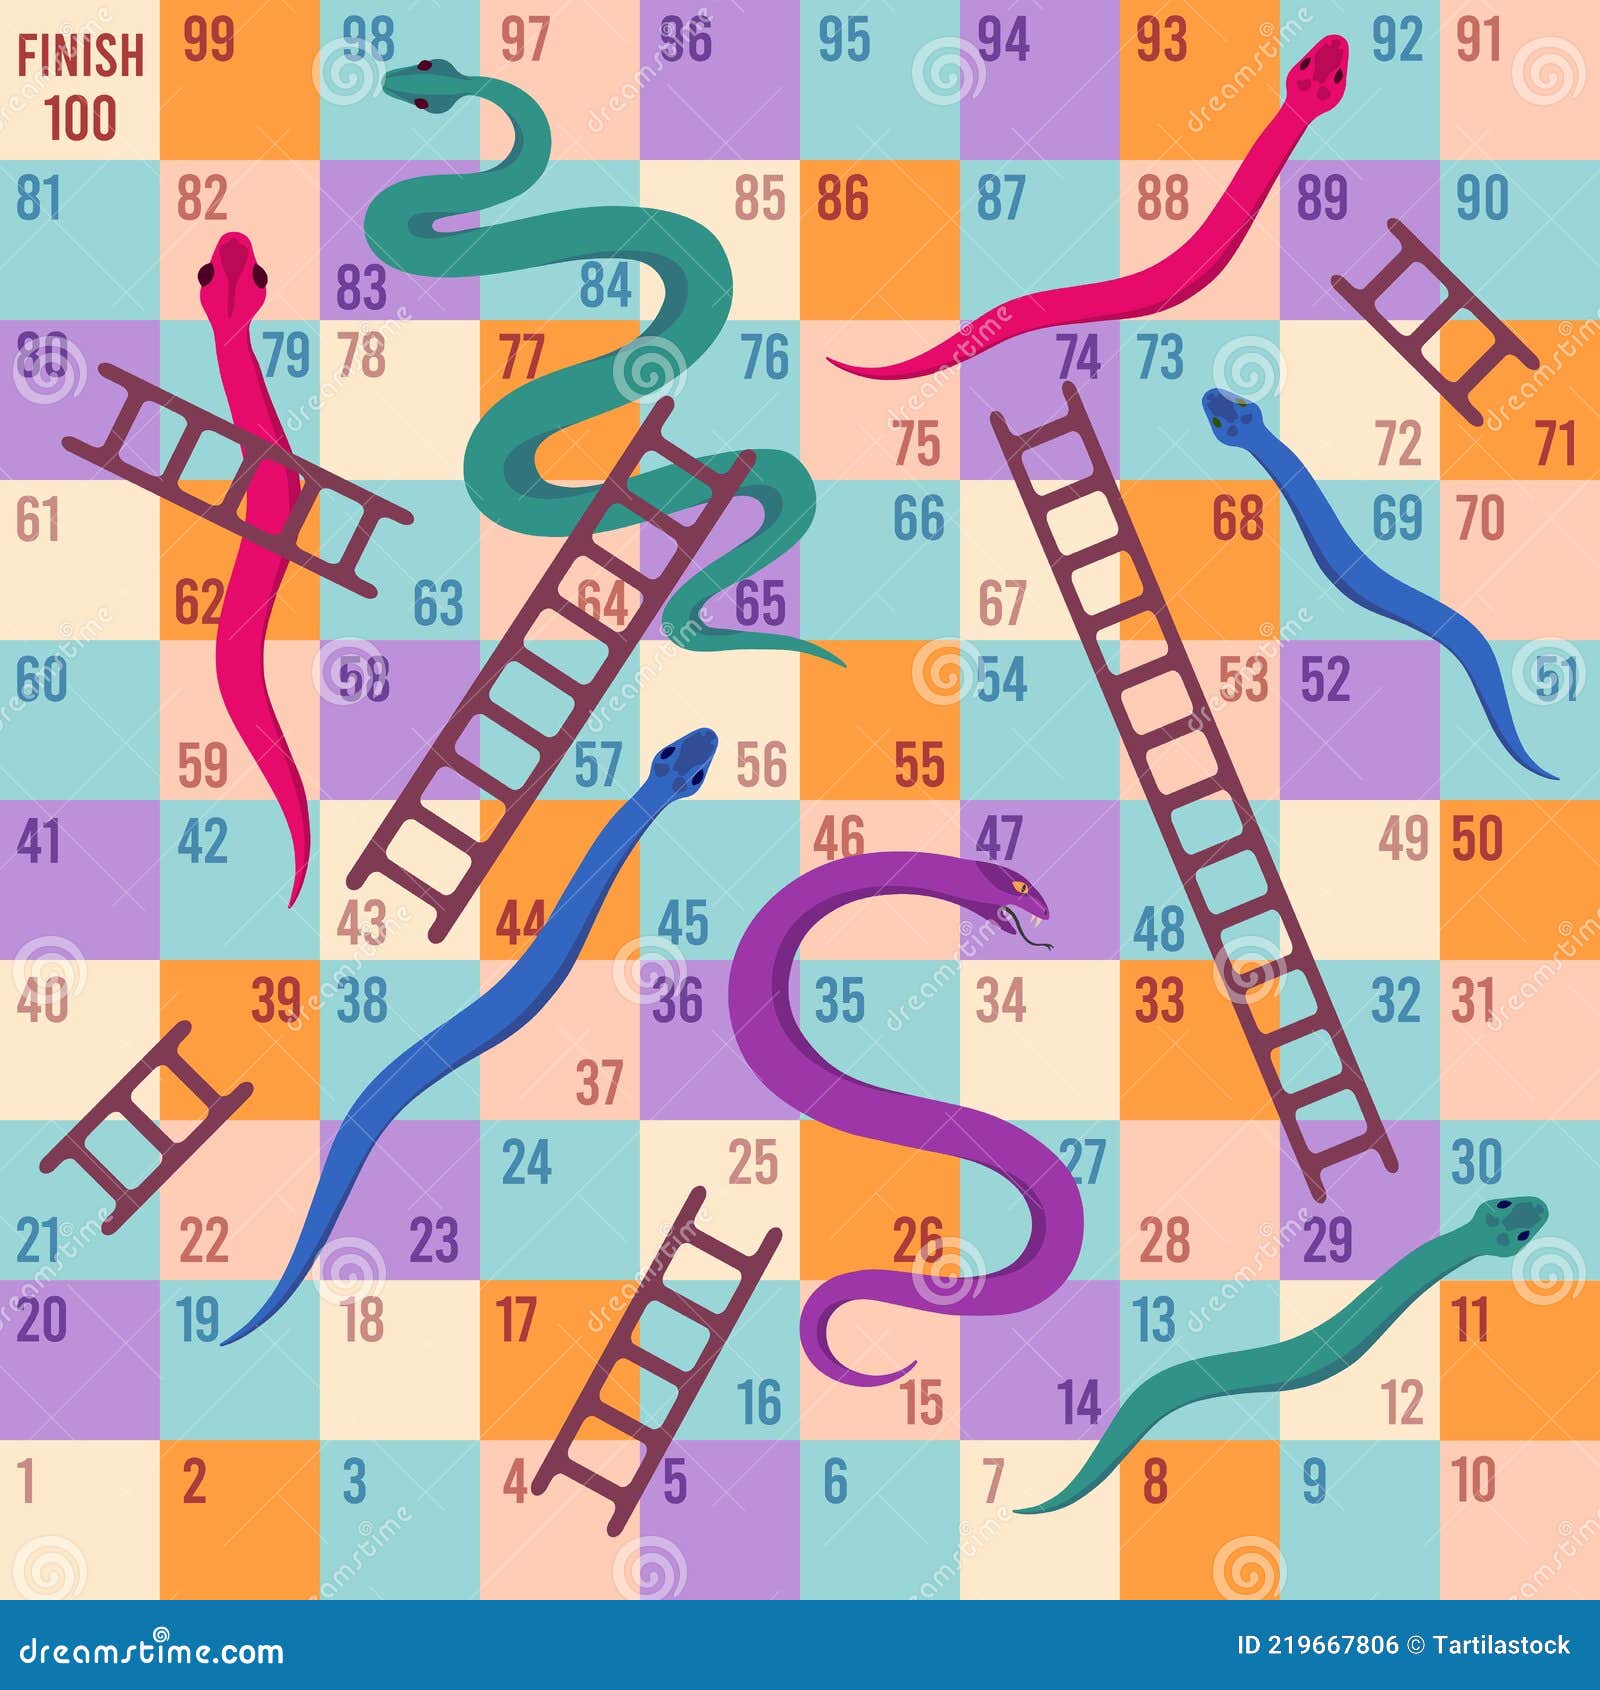 snakes and ladders. kids dice board game. climbing puzzle map for children play activity. fun traveling boardgame